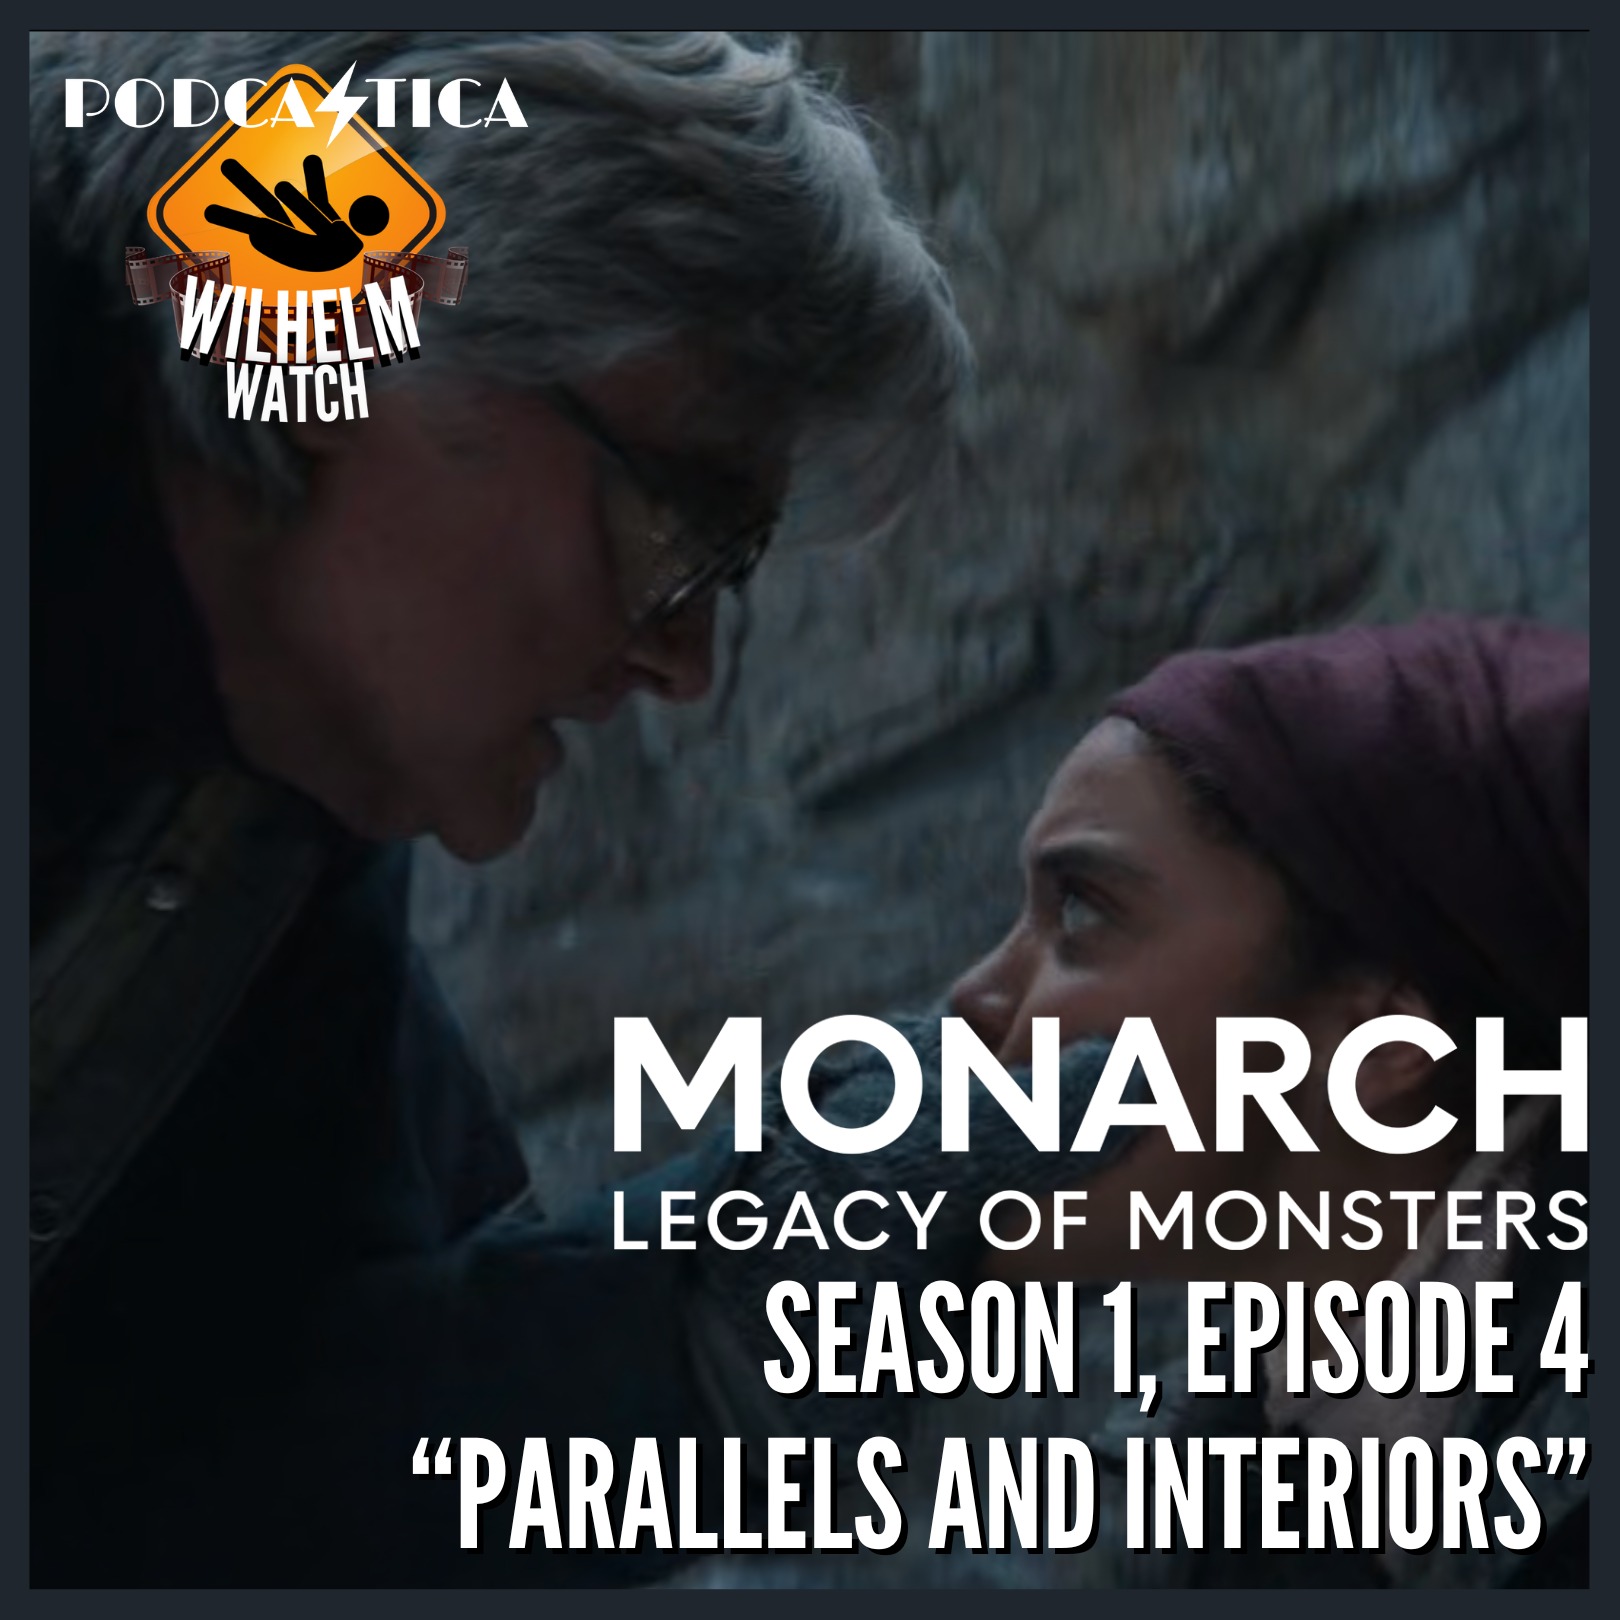 WILHELM WATCH / HOUSE PODCASTICA - Monarch: Legacy of Monsters S01E04 